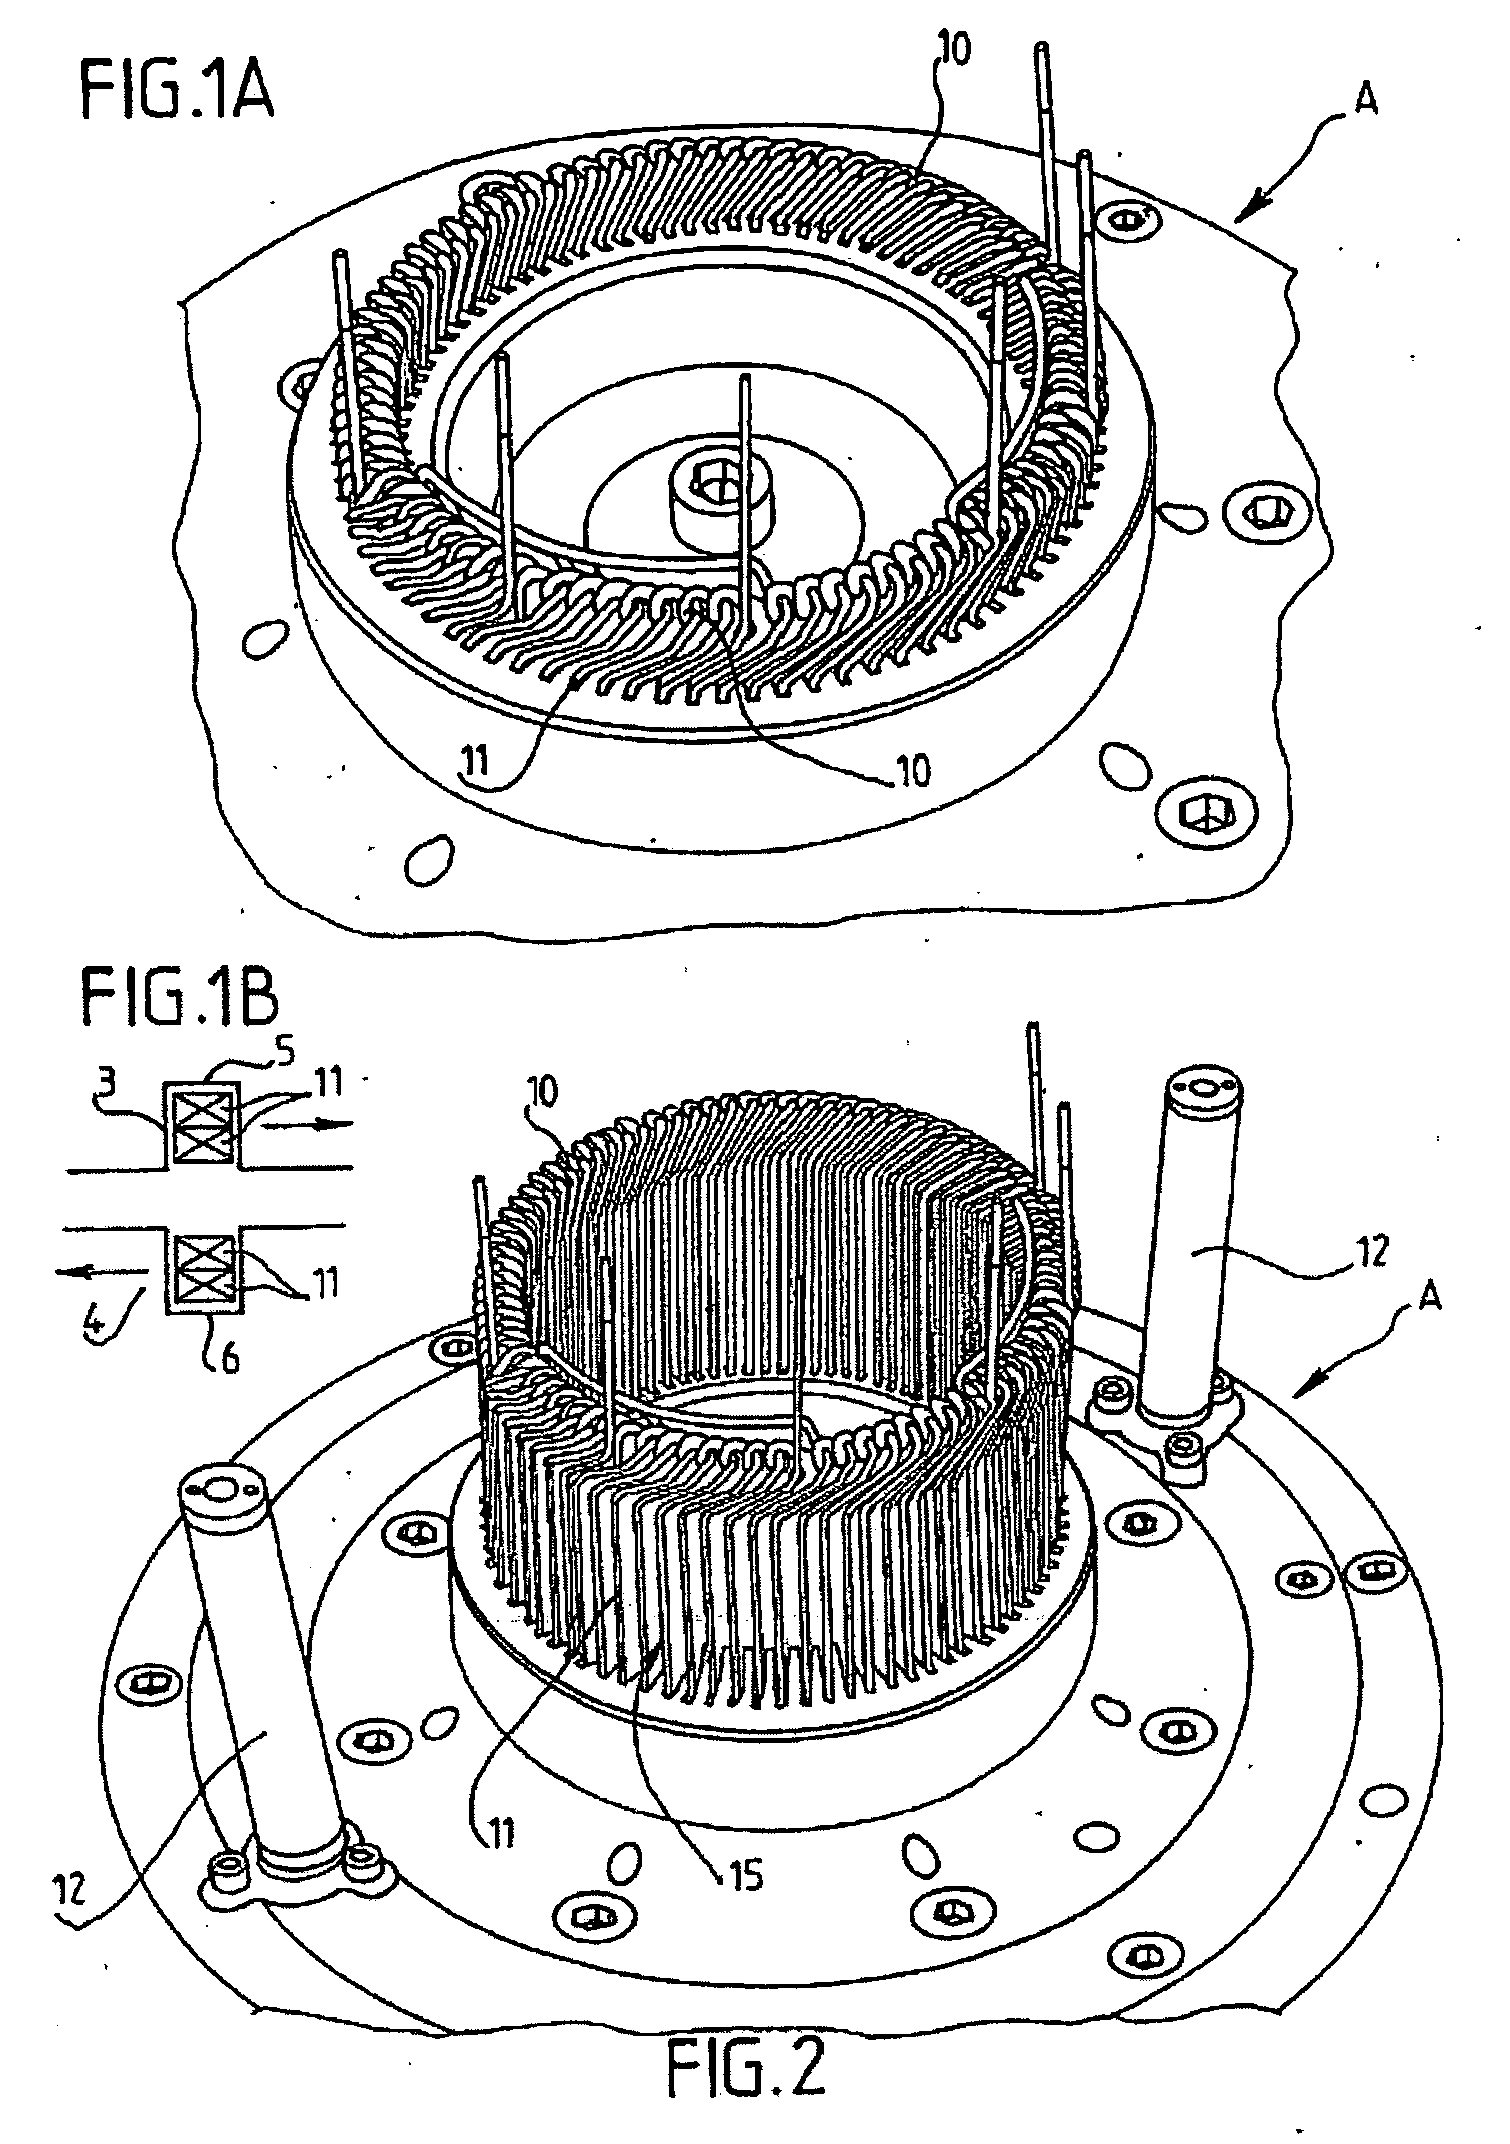 Device for gripping and transferring a ring of electrical conductors which is used to produce a winding and a winding-productuion system employing one such device